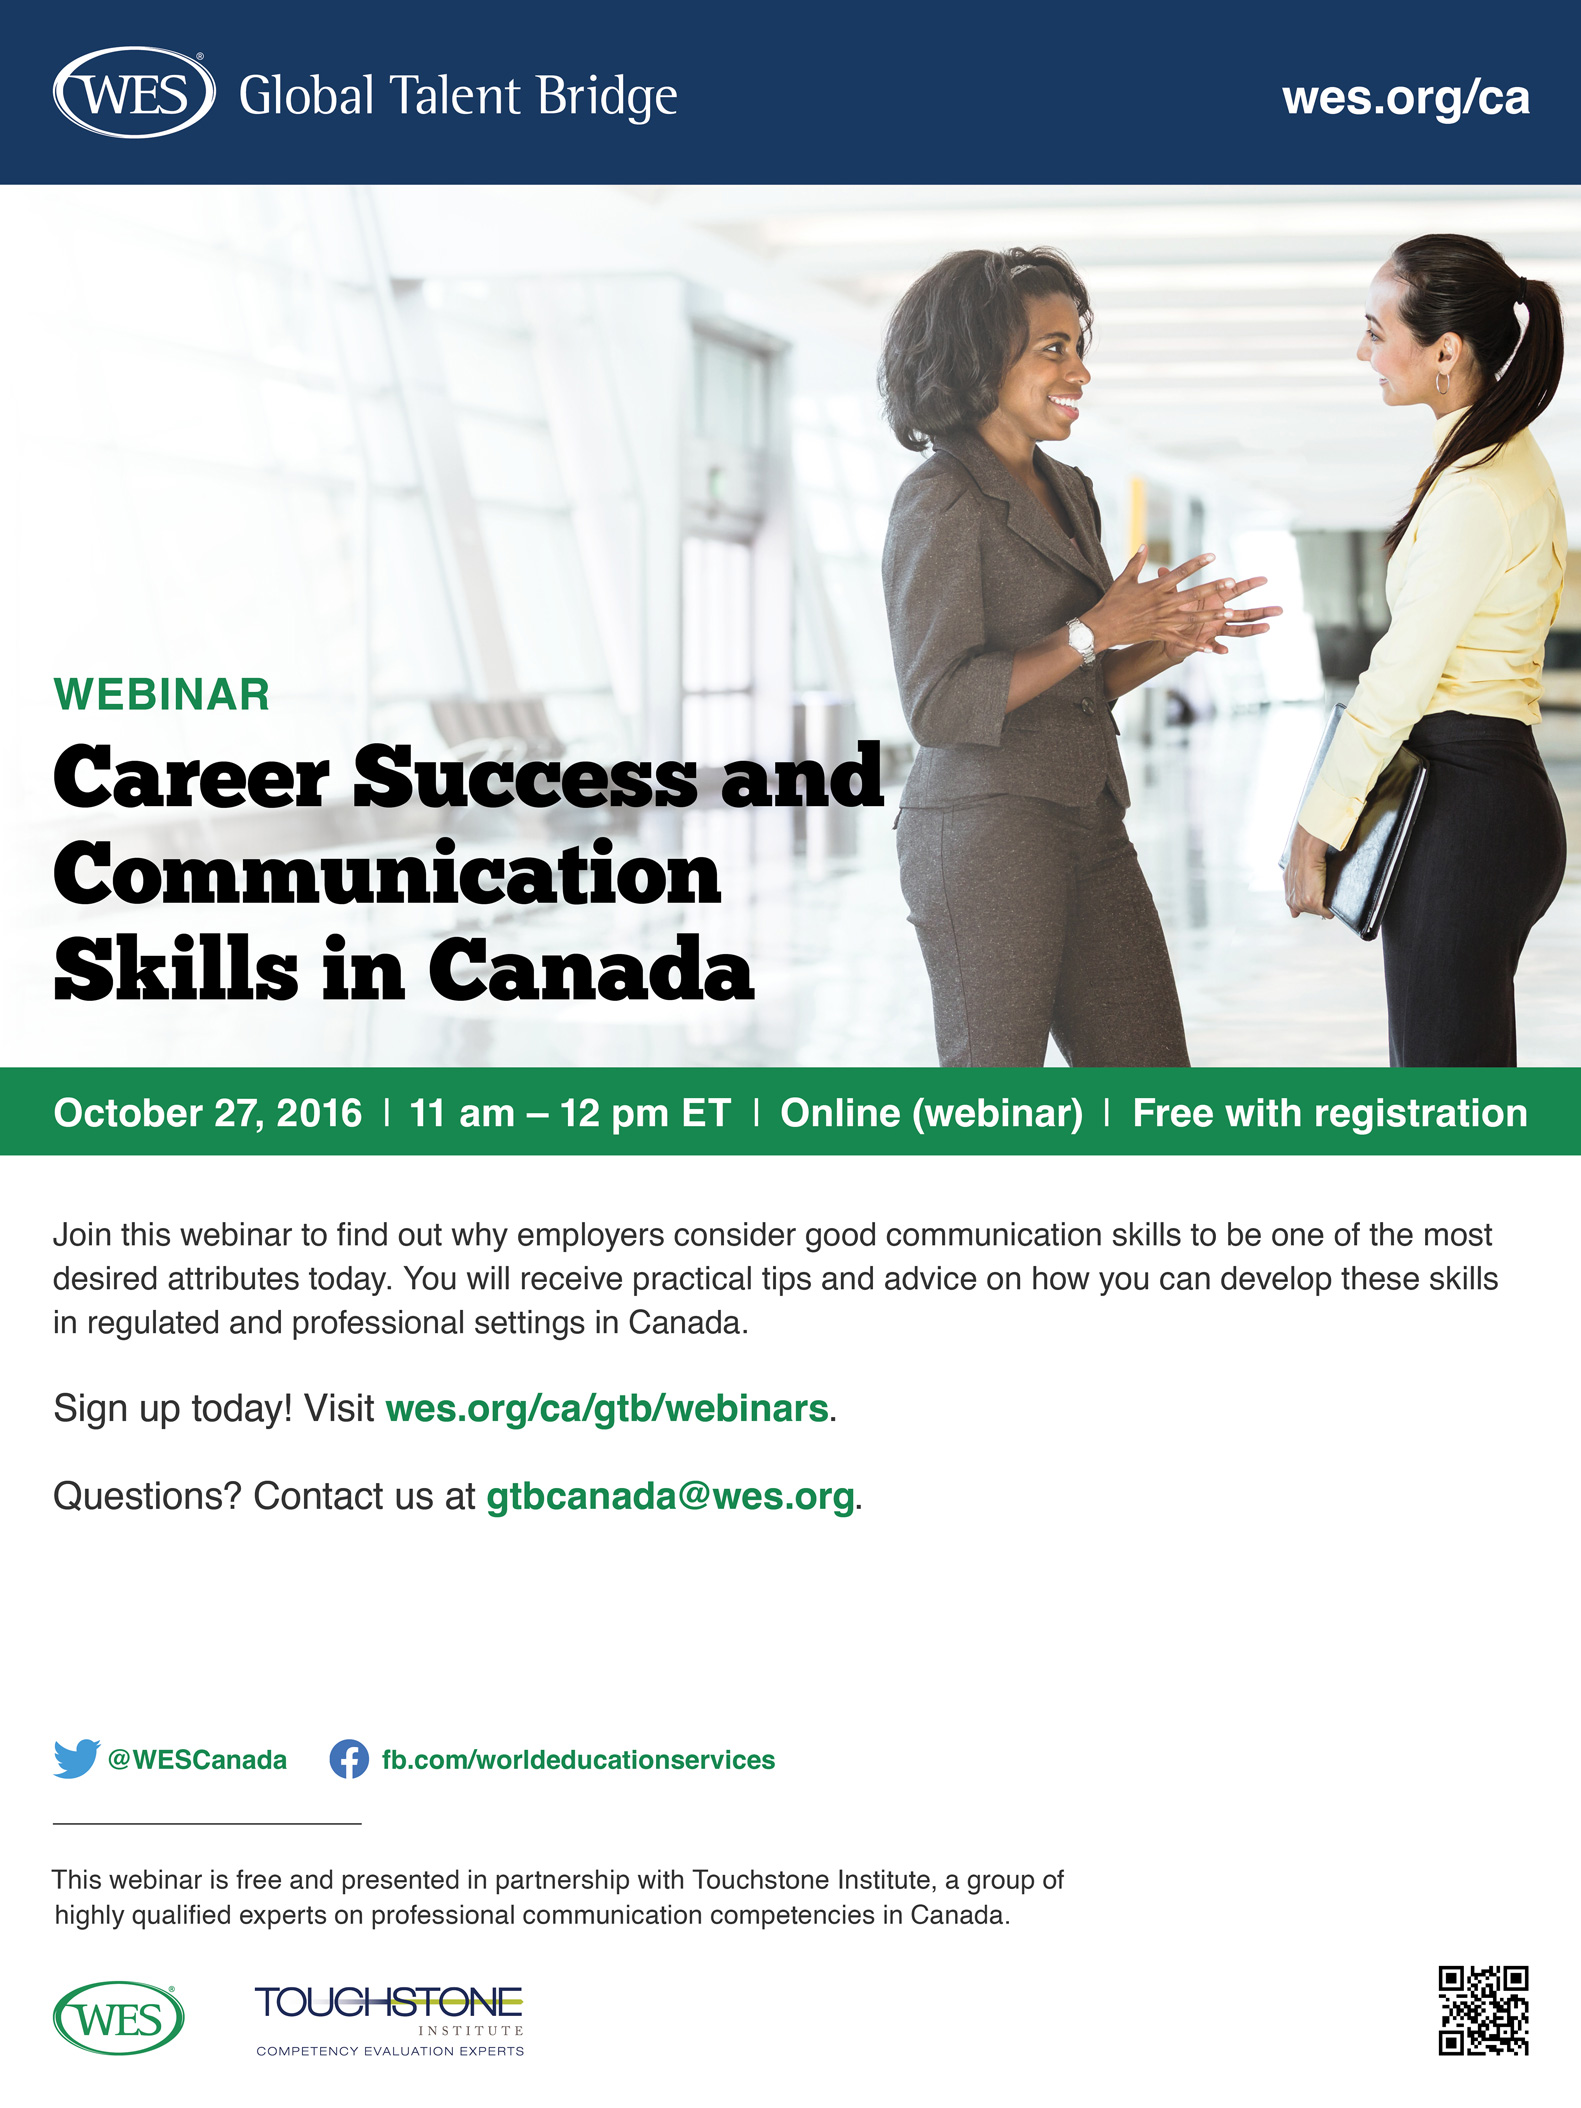 Flyer promoting a webinar on the topic of career success in Canada.